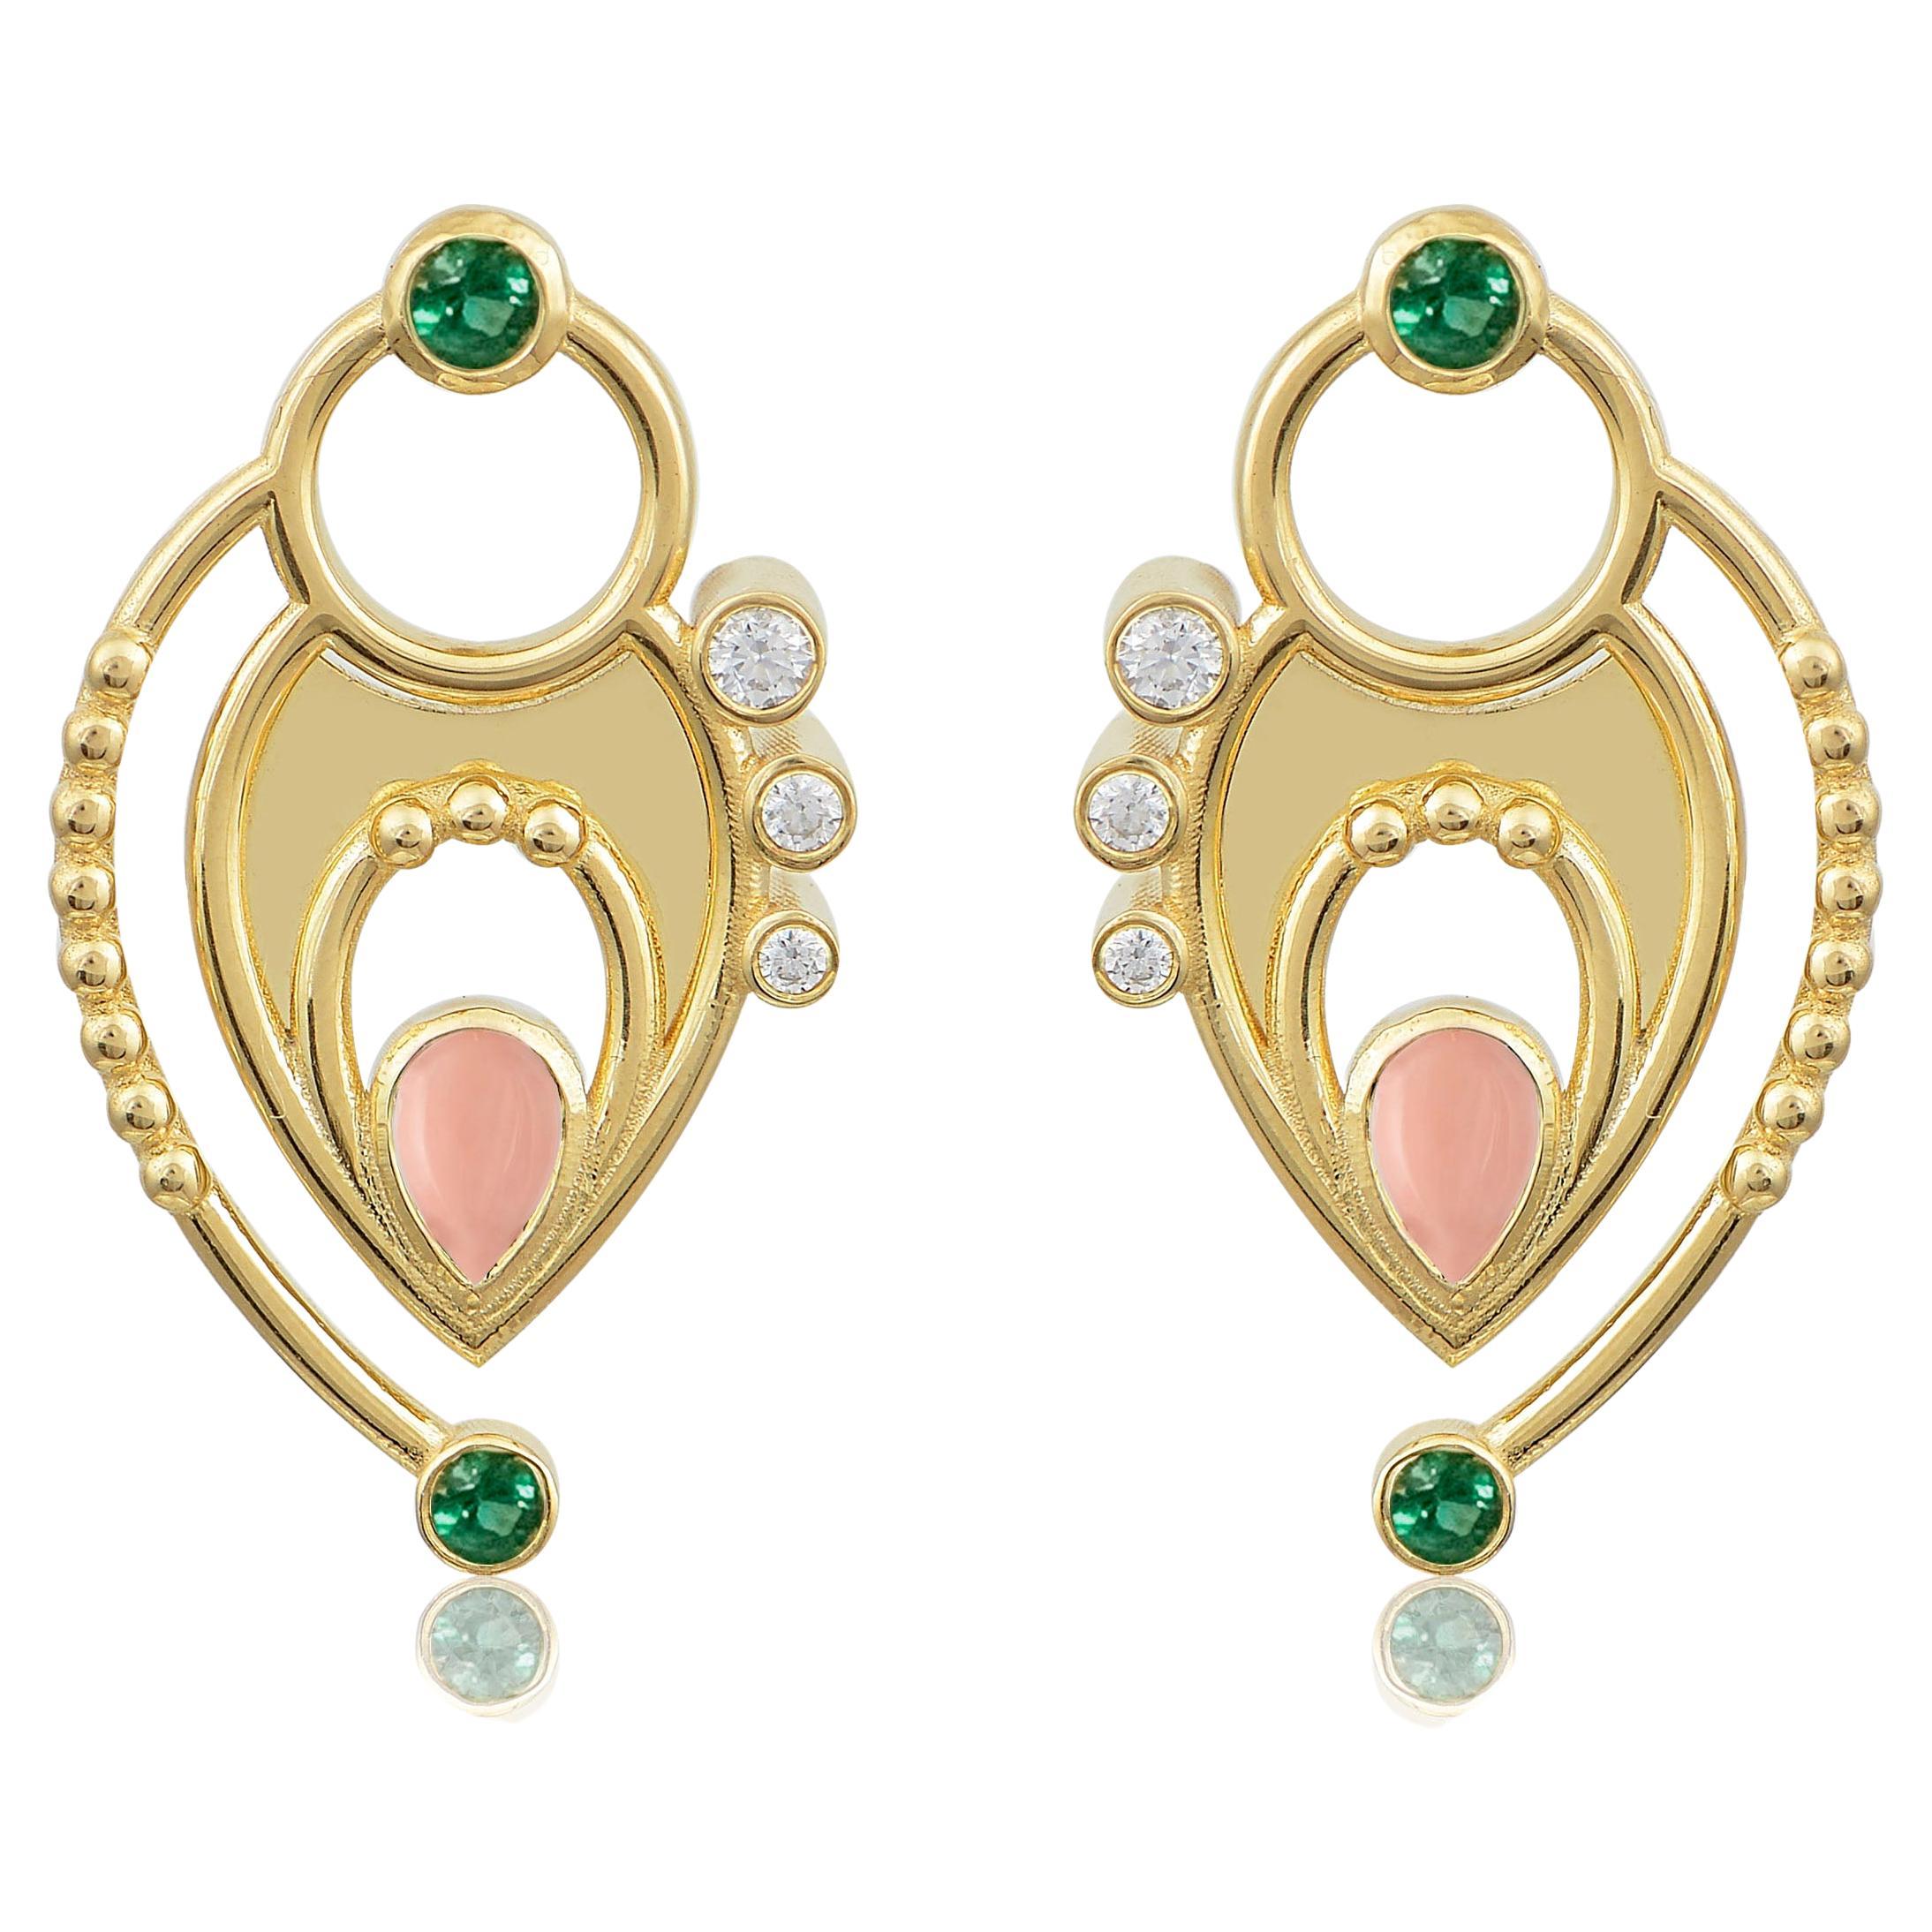 Gold Textures Earrings in 18 Karat Yellow Gold with Diamonds, Coral, Emerald